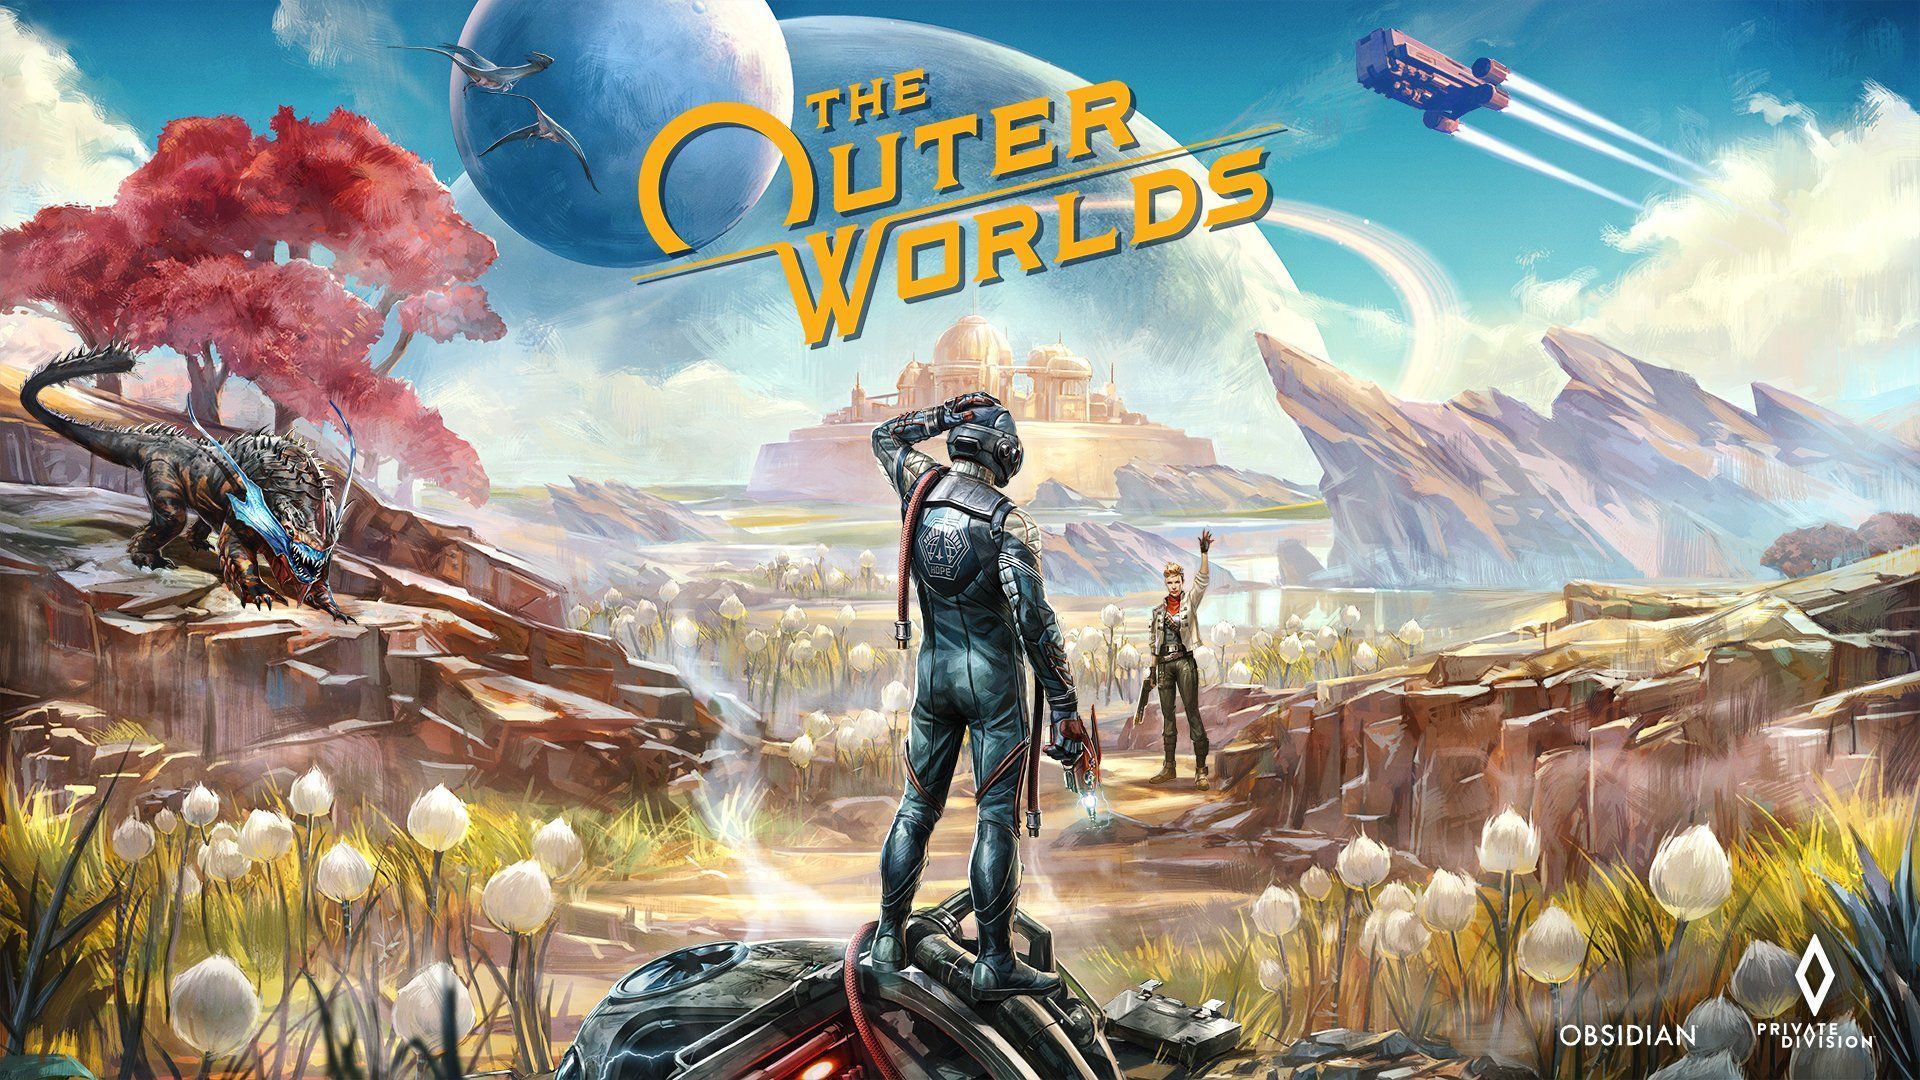 The Outer Worlds Wallpaper Free The Outer Worlds